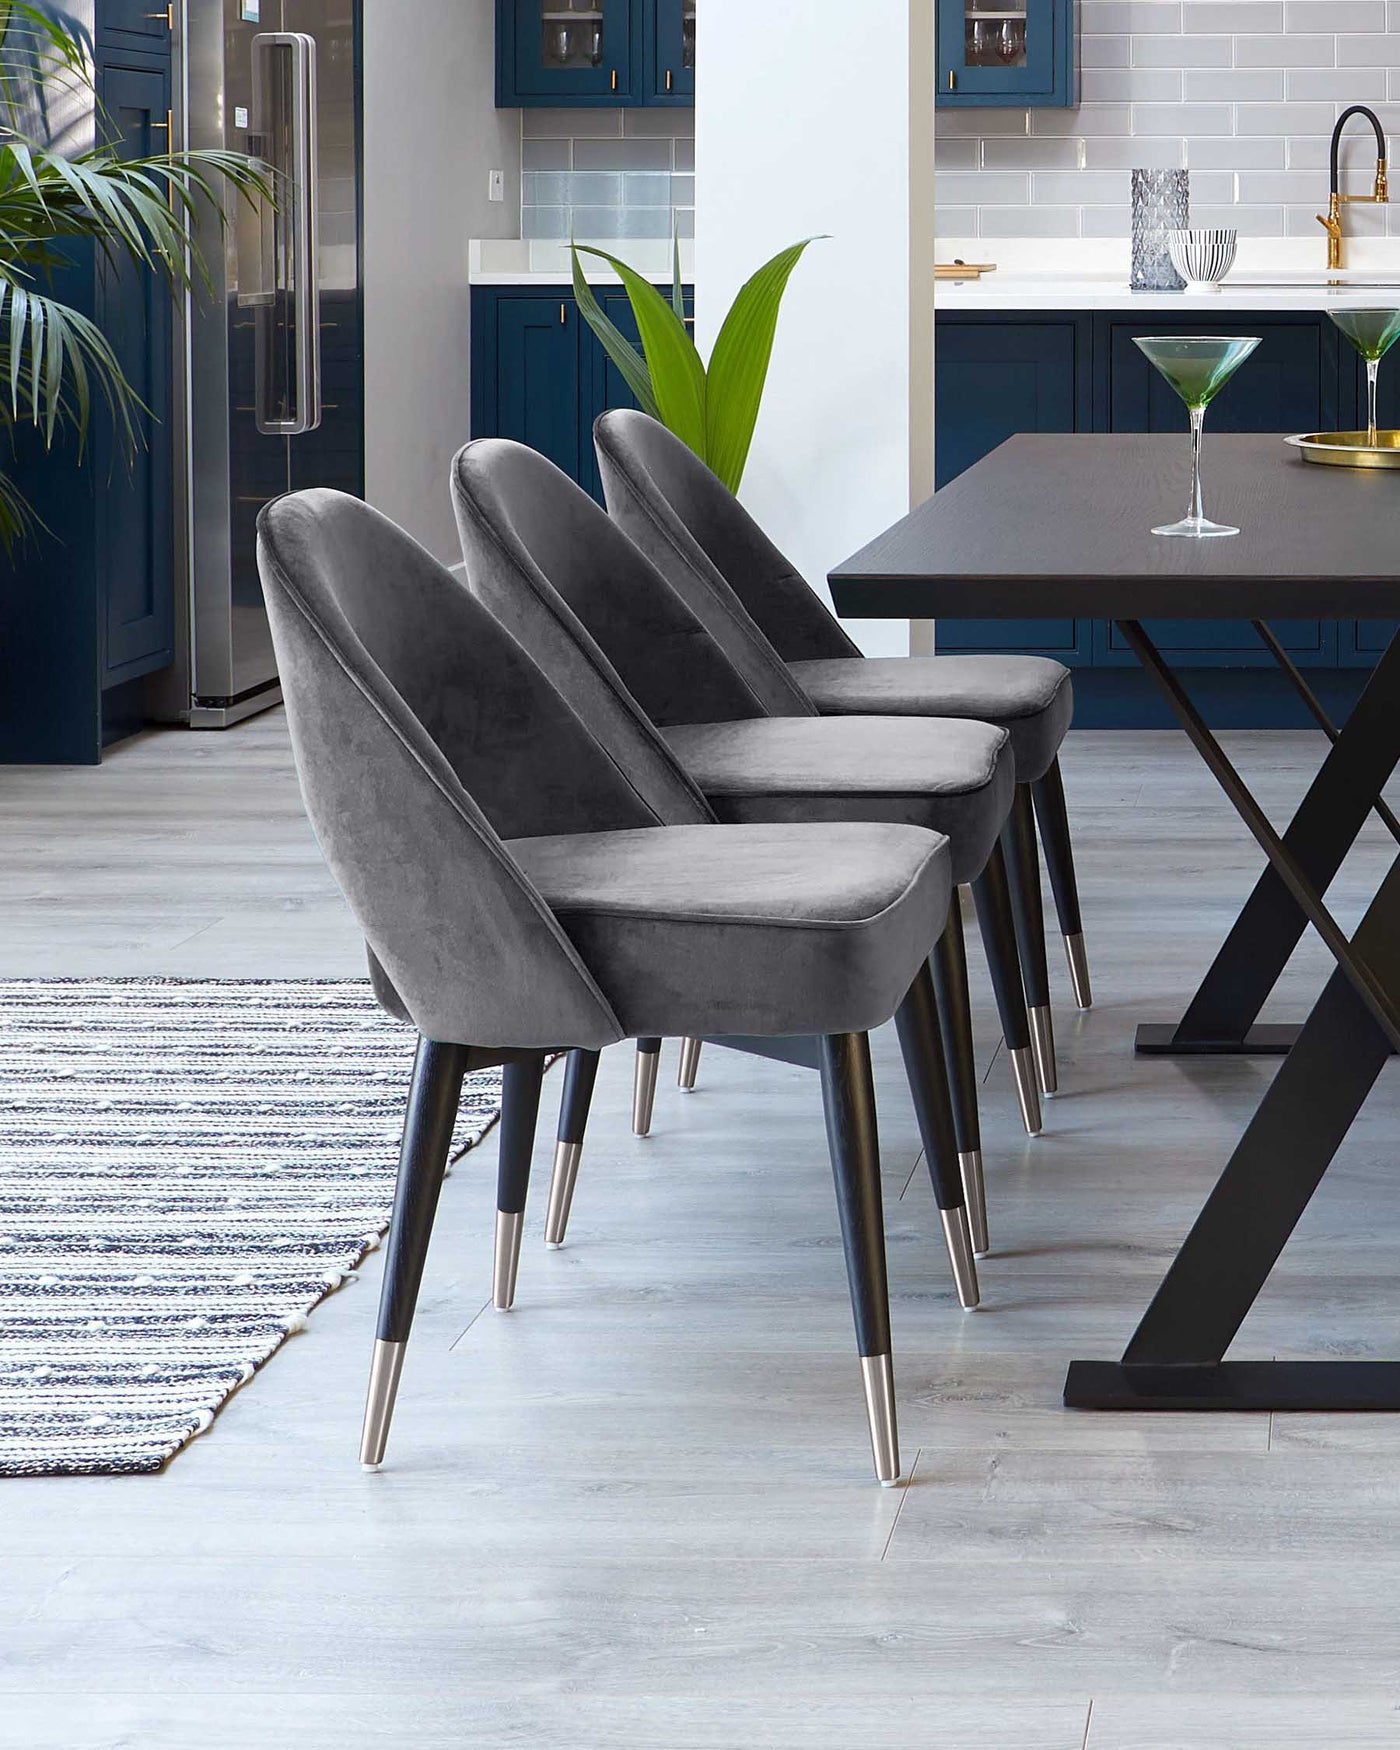 A set of four modern dining chairs with dark grey velvet upholstery and angled metal legs with gold-toned tips, paired with a minimalist dark wooden dining table with a rectangular top and sturdy black metal legs, displayed on a light wooden floor with a textured grey and white area rug. The setting is complemented by a contemporary kitchen with blue cabinets in the background.